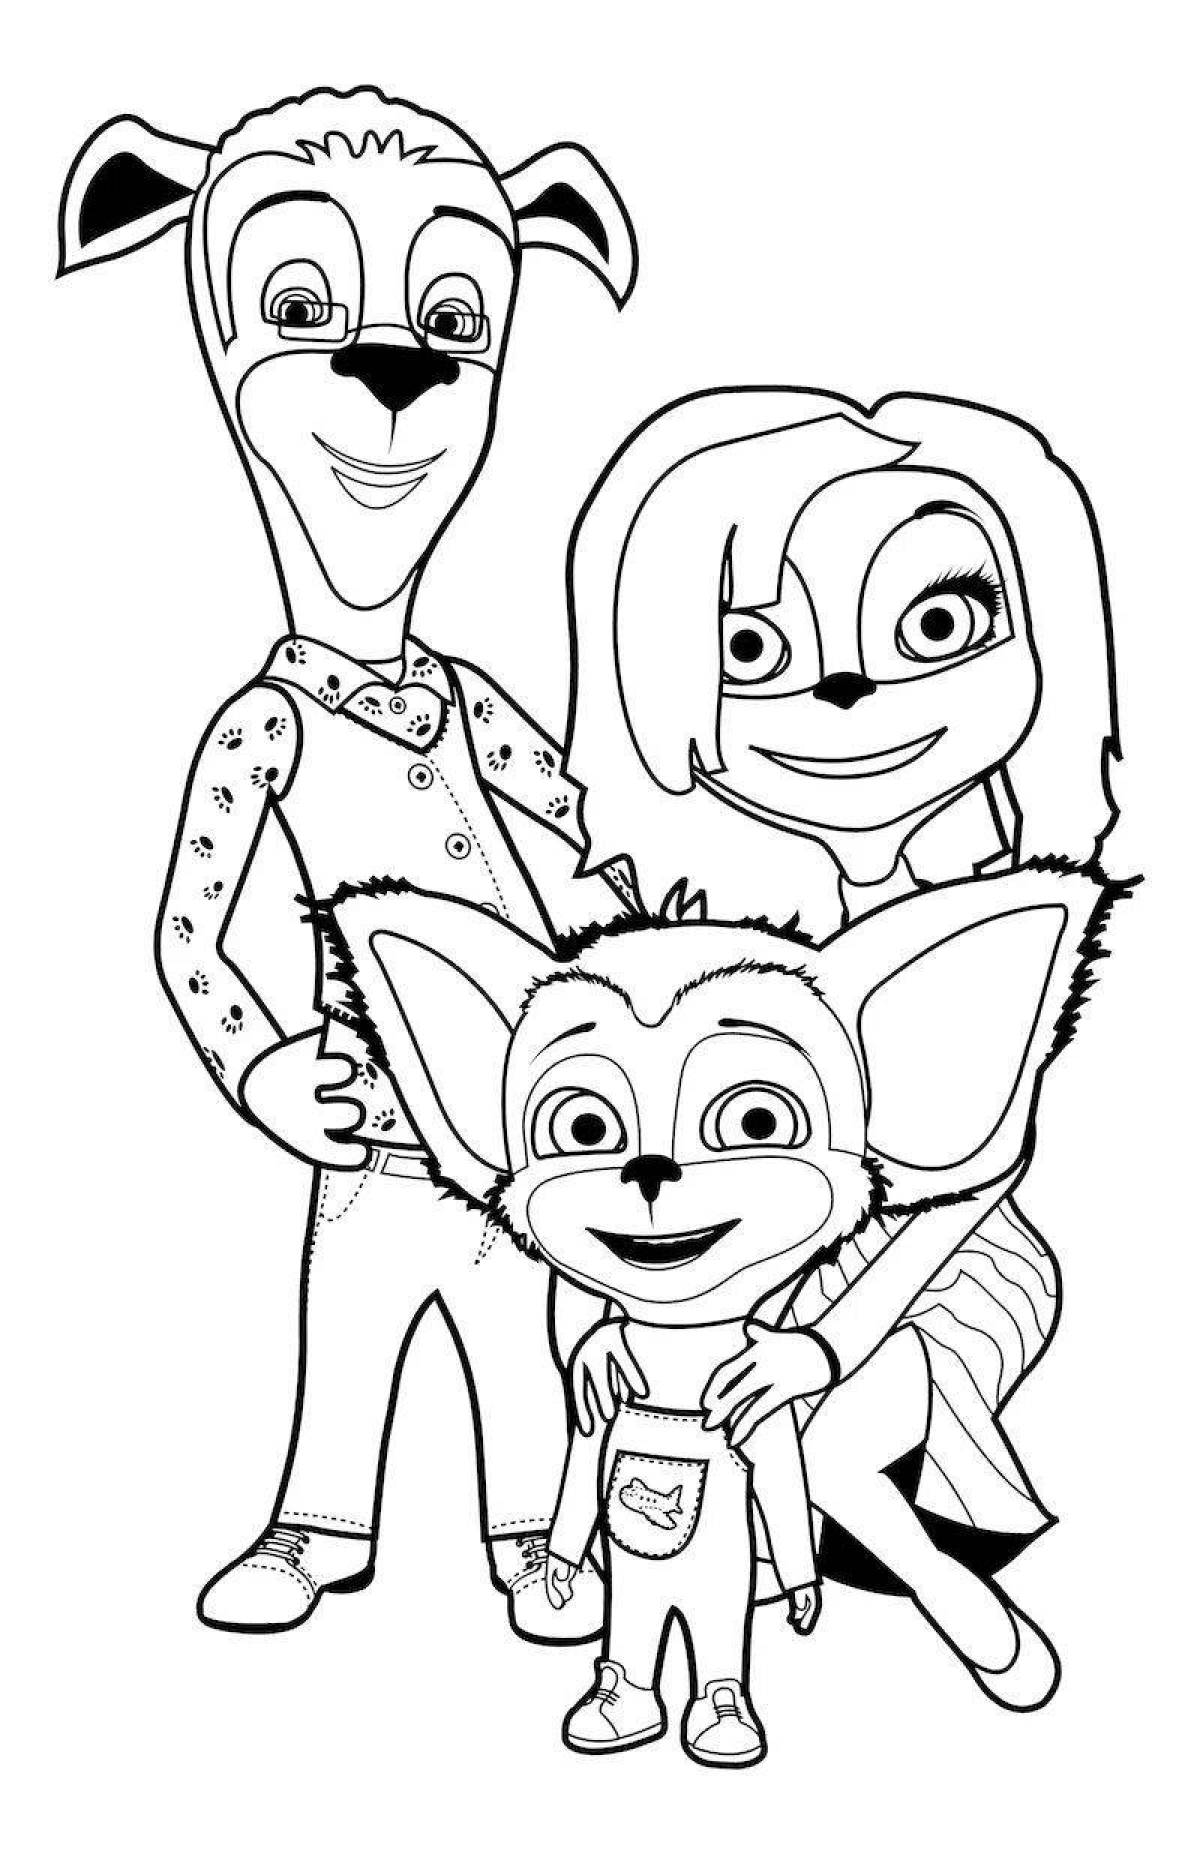 Exciting barboskin coloring pages